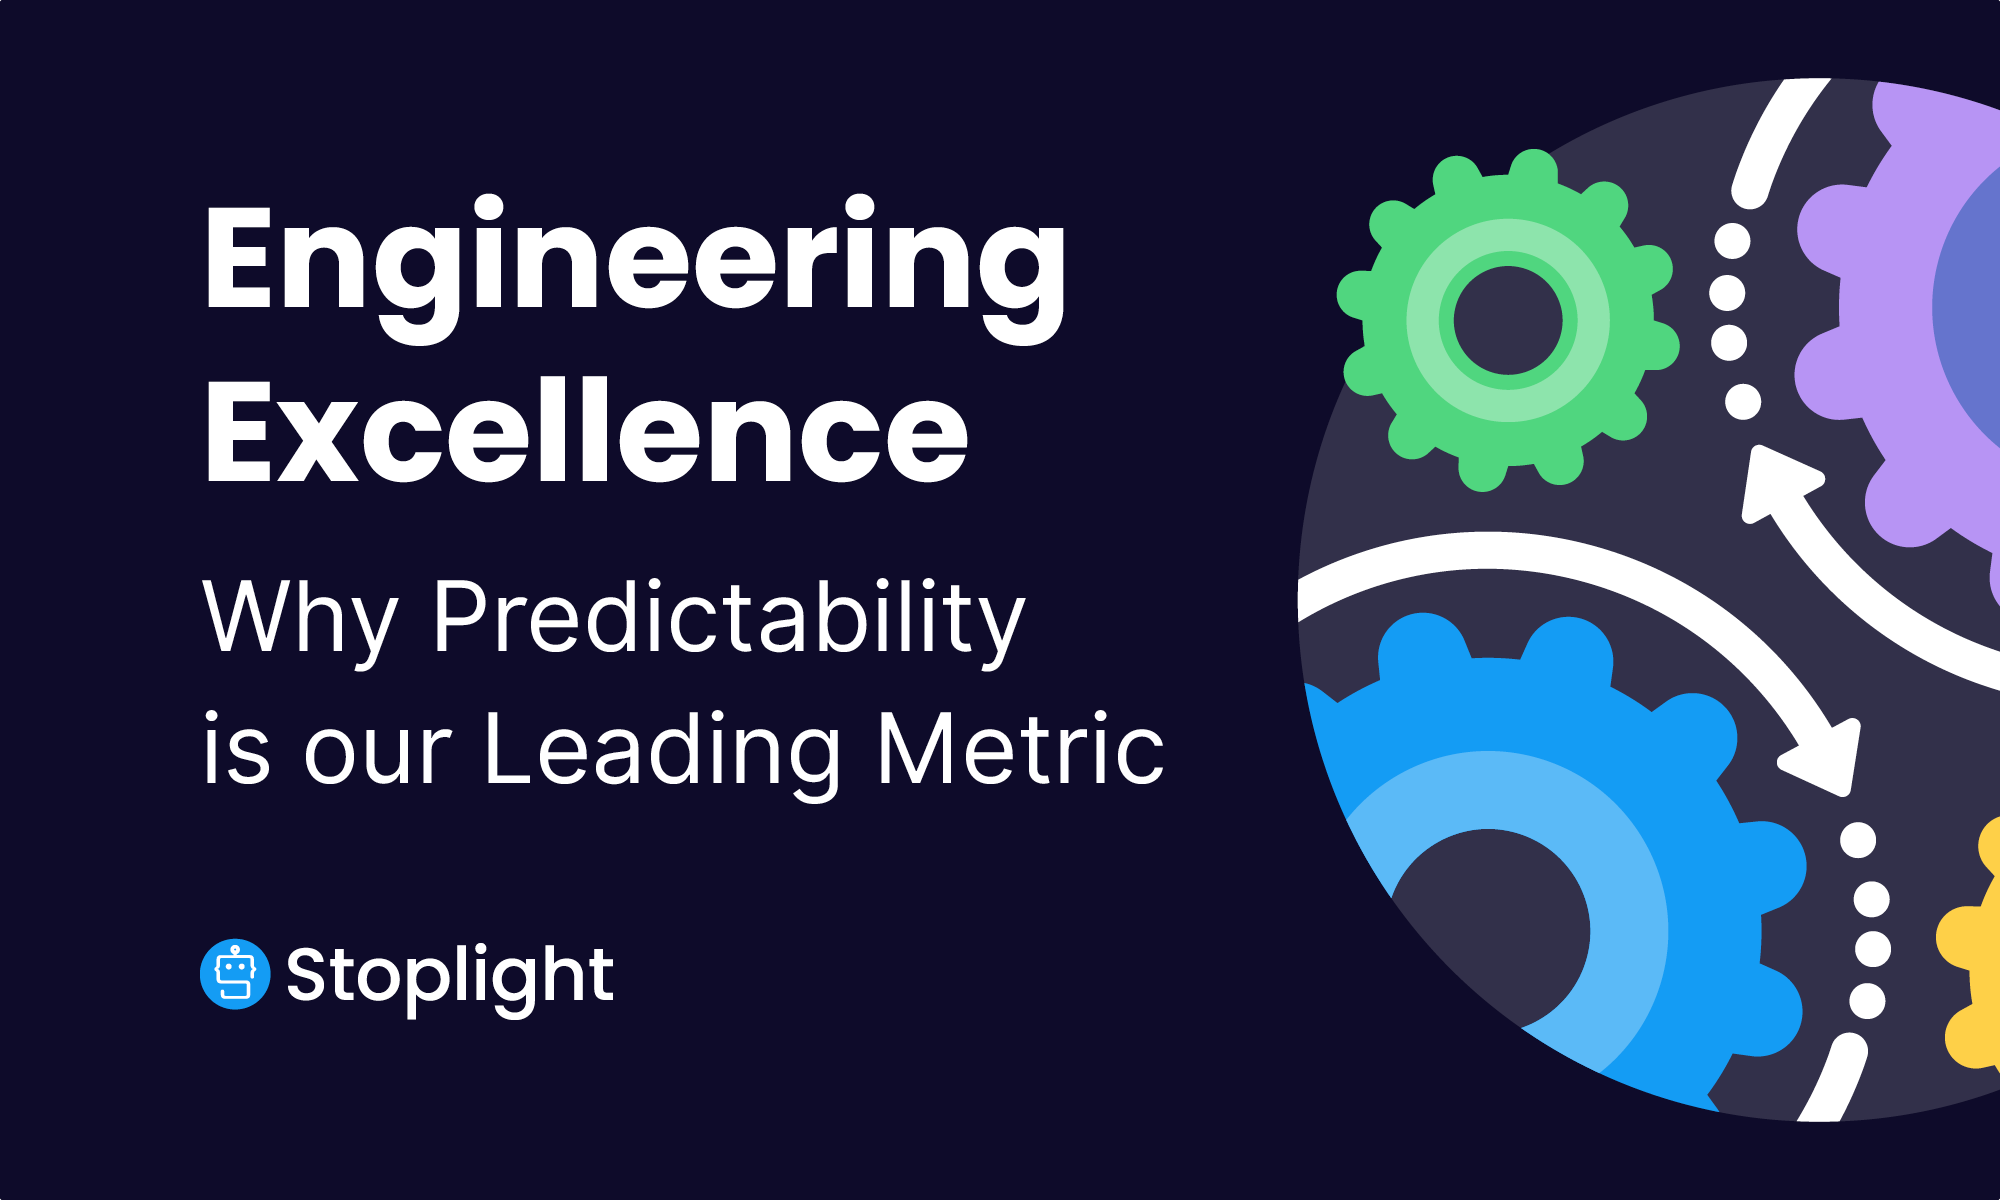 Engineering Excellence: Why Predictability is Our Leading Metric